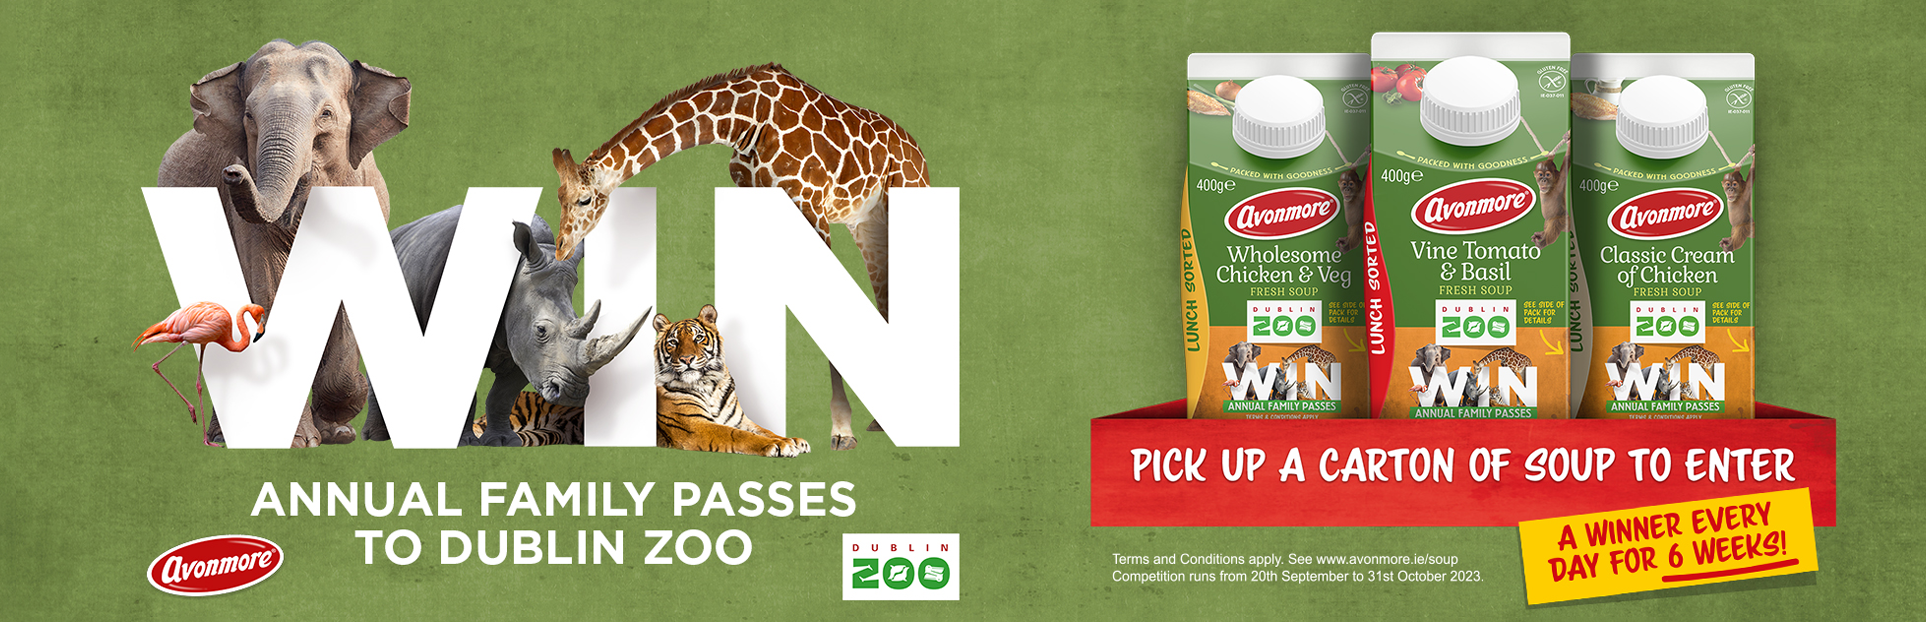 Win an annual family passes to Dublin Zoo